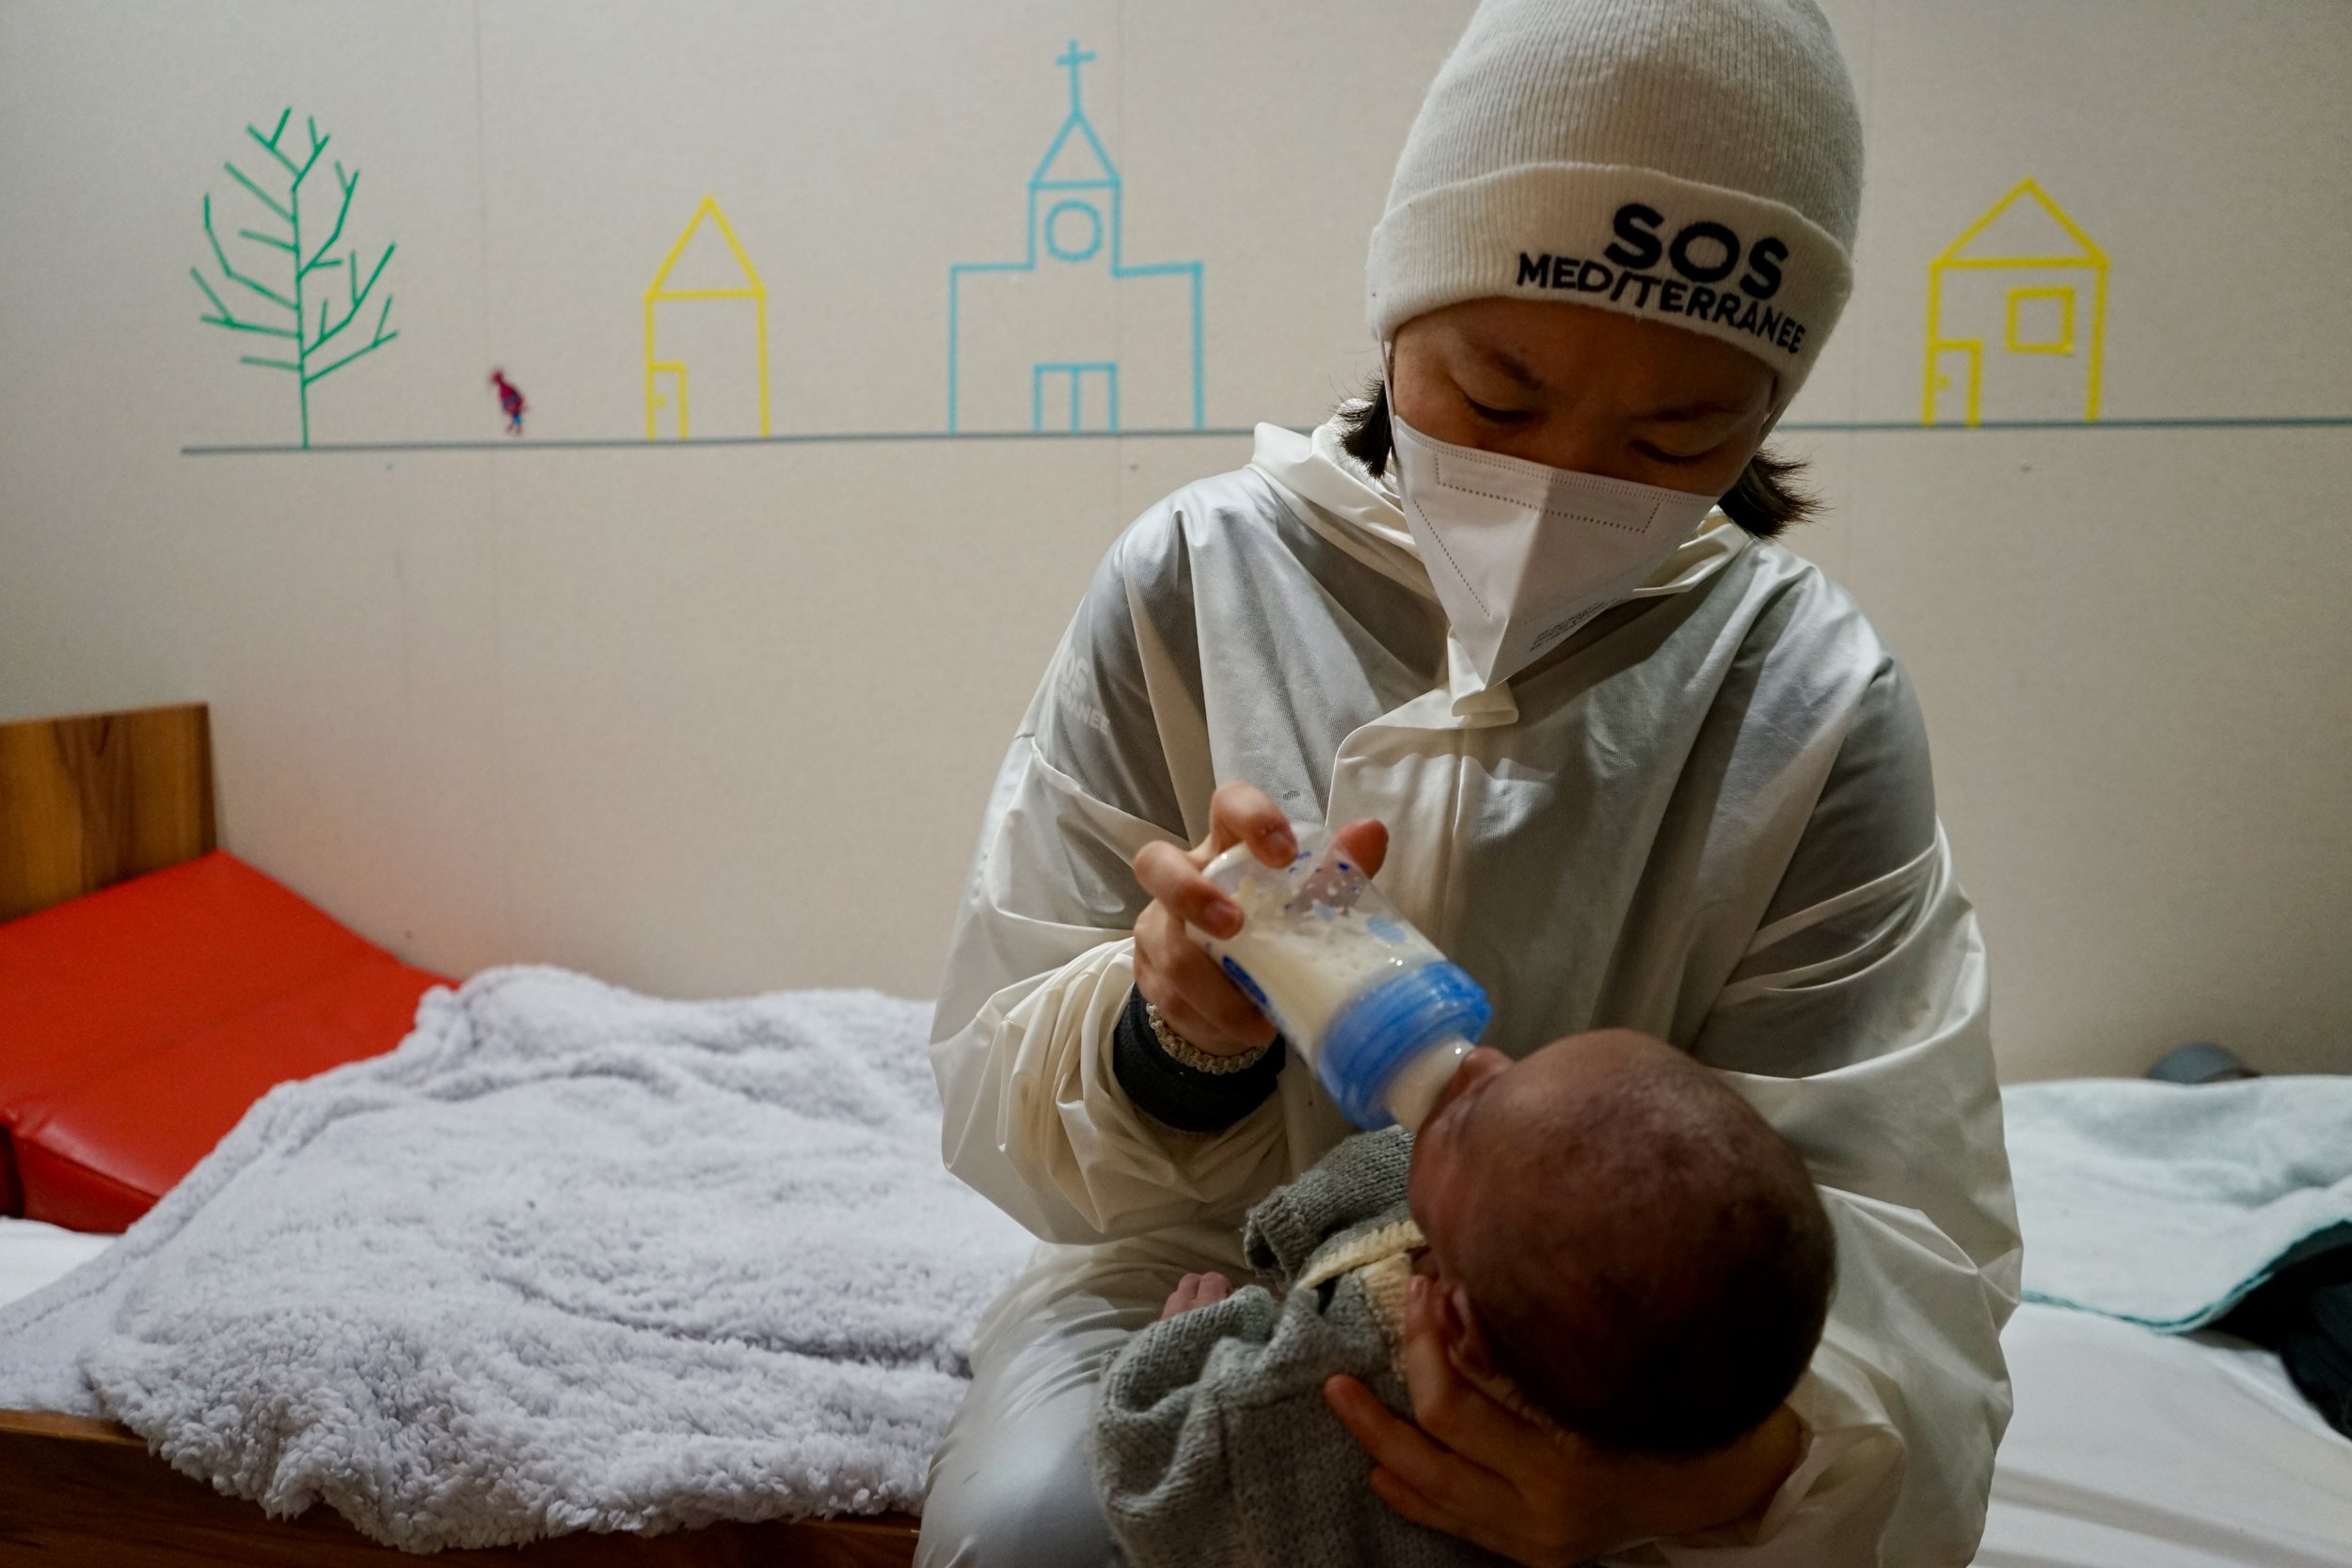 Marina, SOS MEDITERRANEE crew member and a midwife, gives a 4-week-old baby boy milk to drink. 